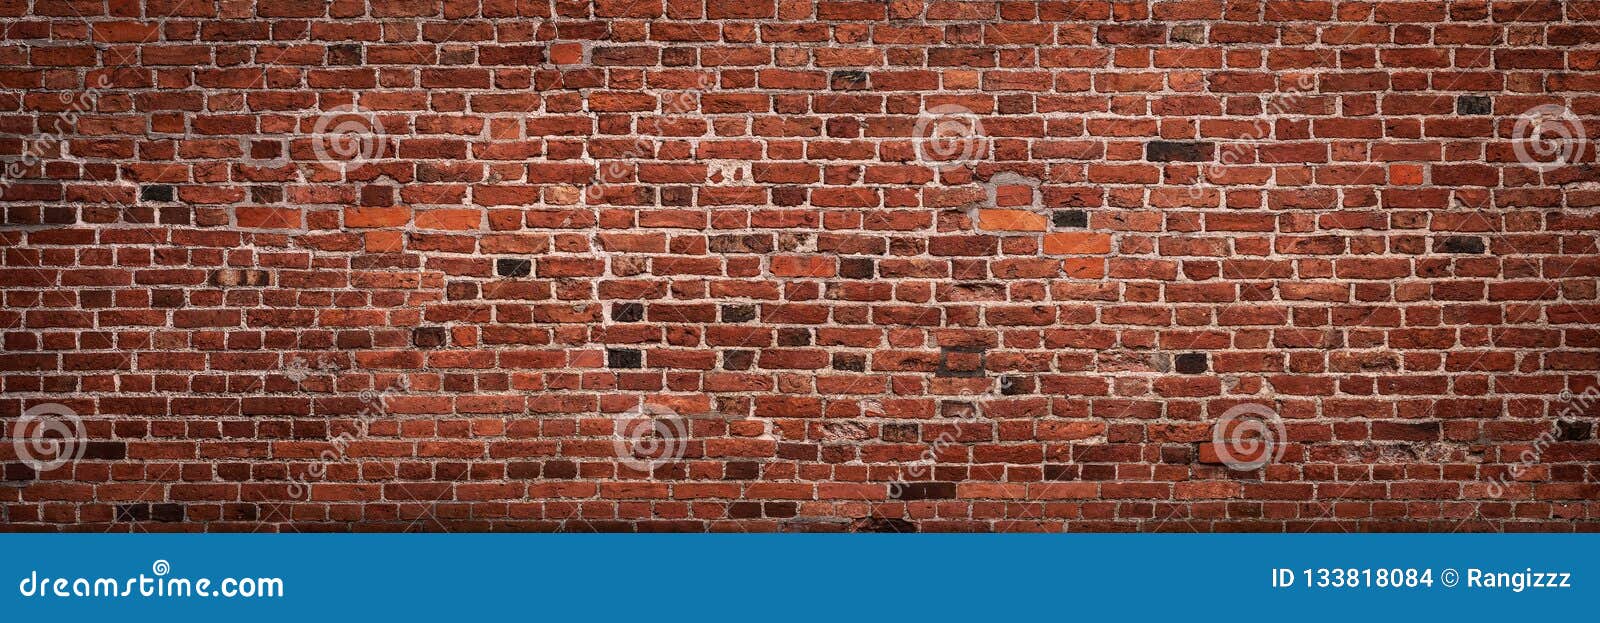 empty old red brick wall background